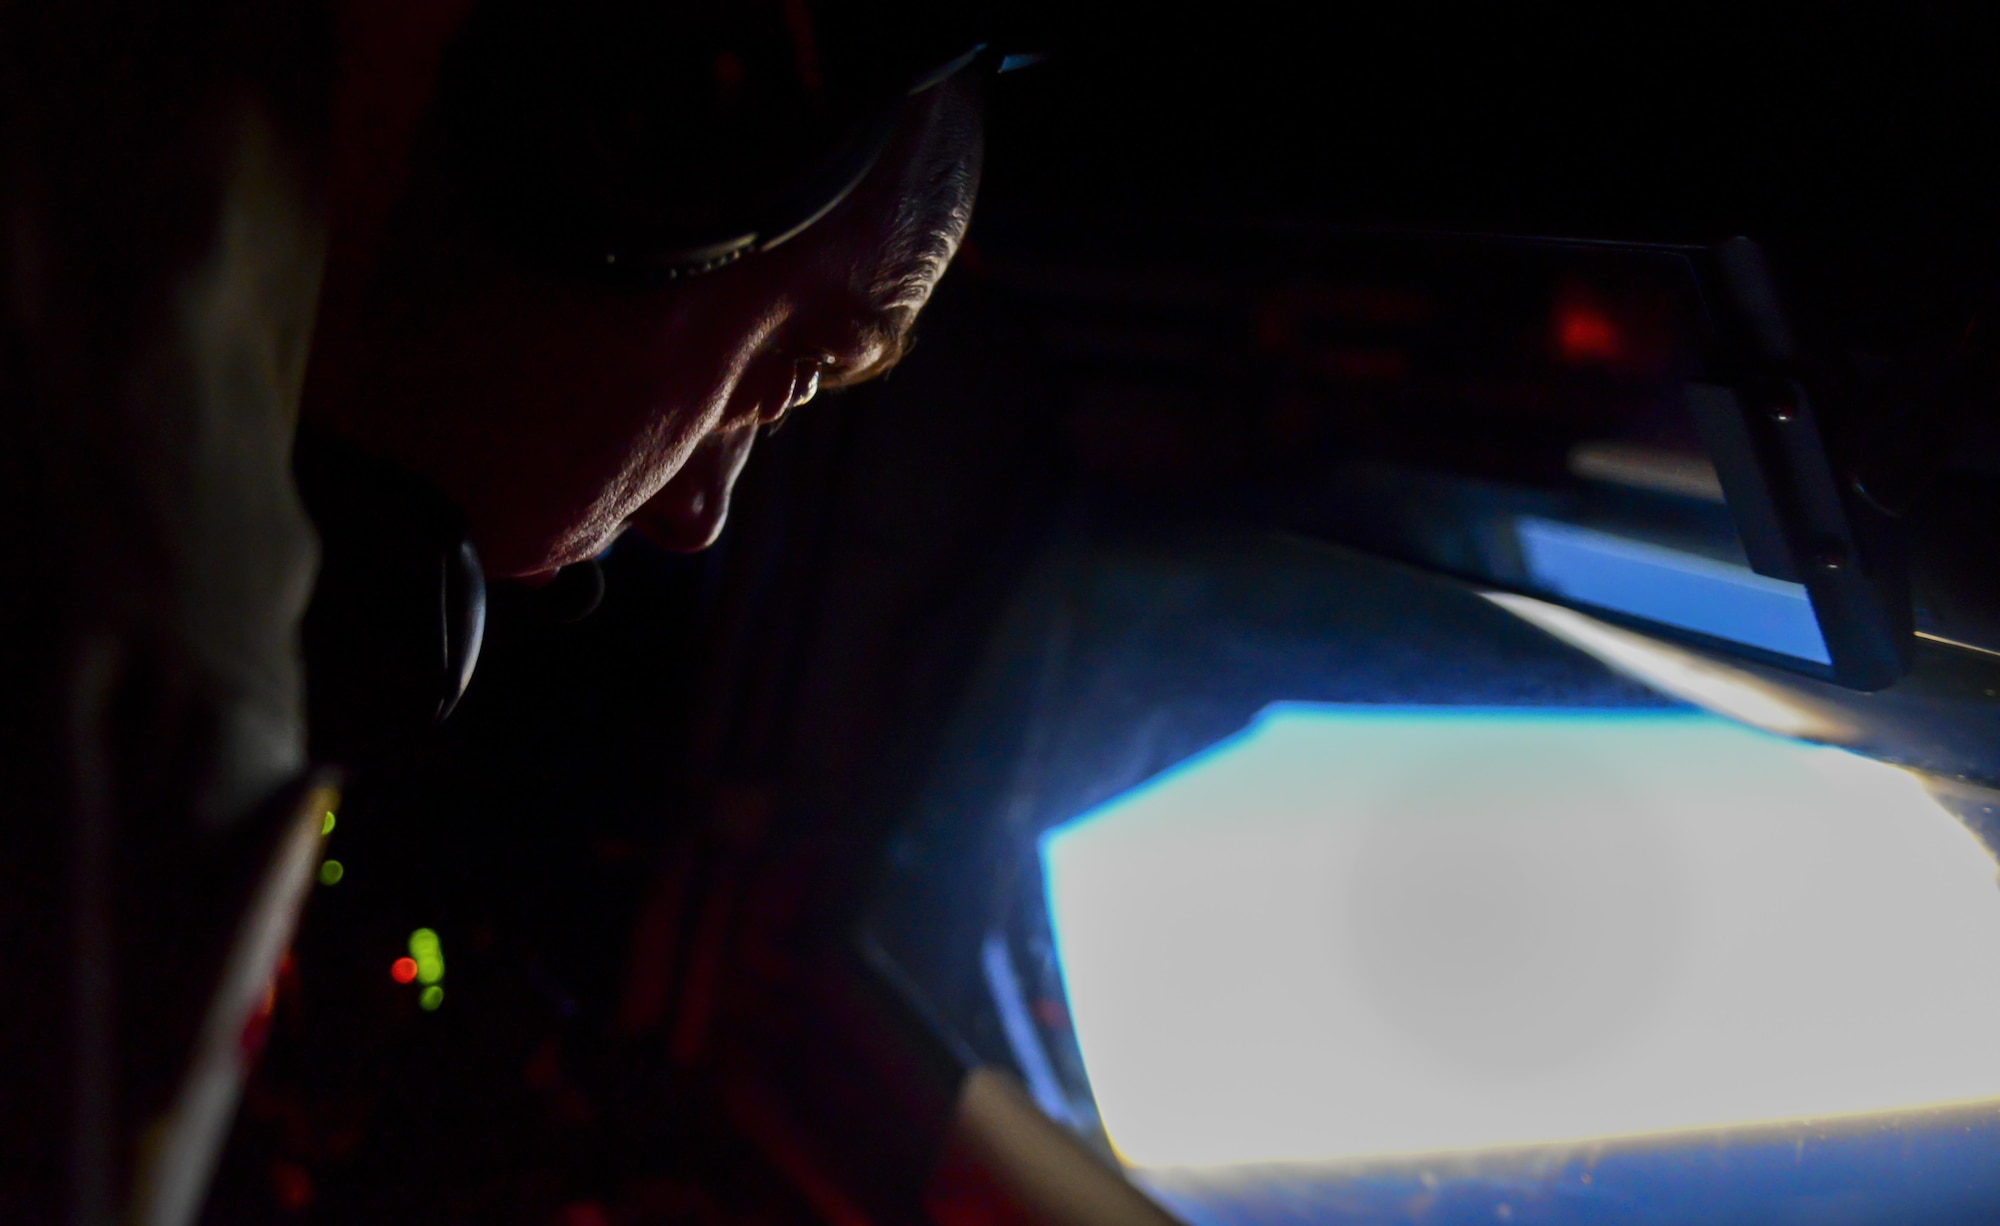 Tech. Sgt. Gerald Sanders, 509th Weapons Squadron Boom Operator, Fairchild Air Force Base, Wash., prepares to refuel an aircraft during Deliberate Strike Night over the Nevada Test and Training Range, June 16, 2016. One of the most important planned aspects of DSN is holding the exercise during hours of darkness. (U.S. Air Force photo by Airman 1st Class Kevin Tanenbaum)